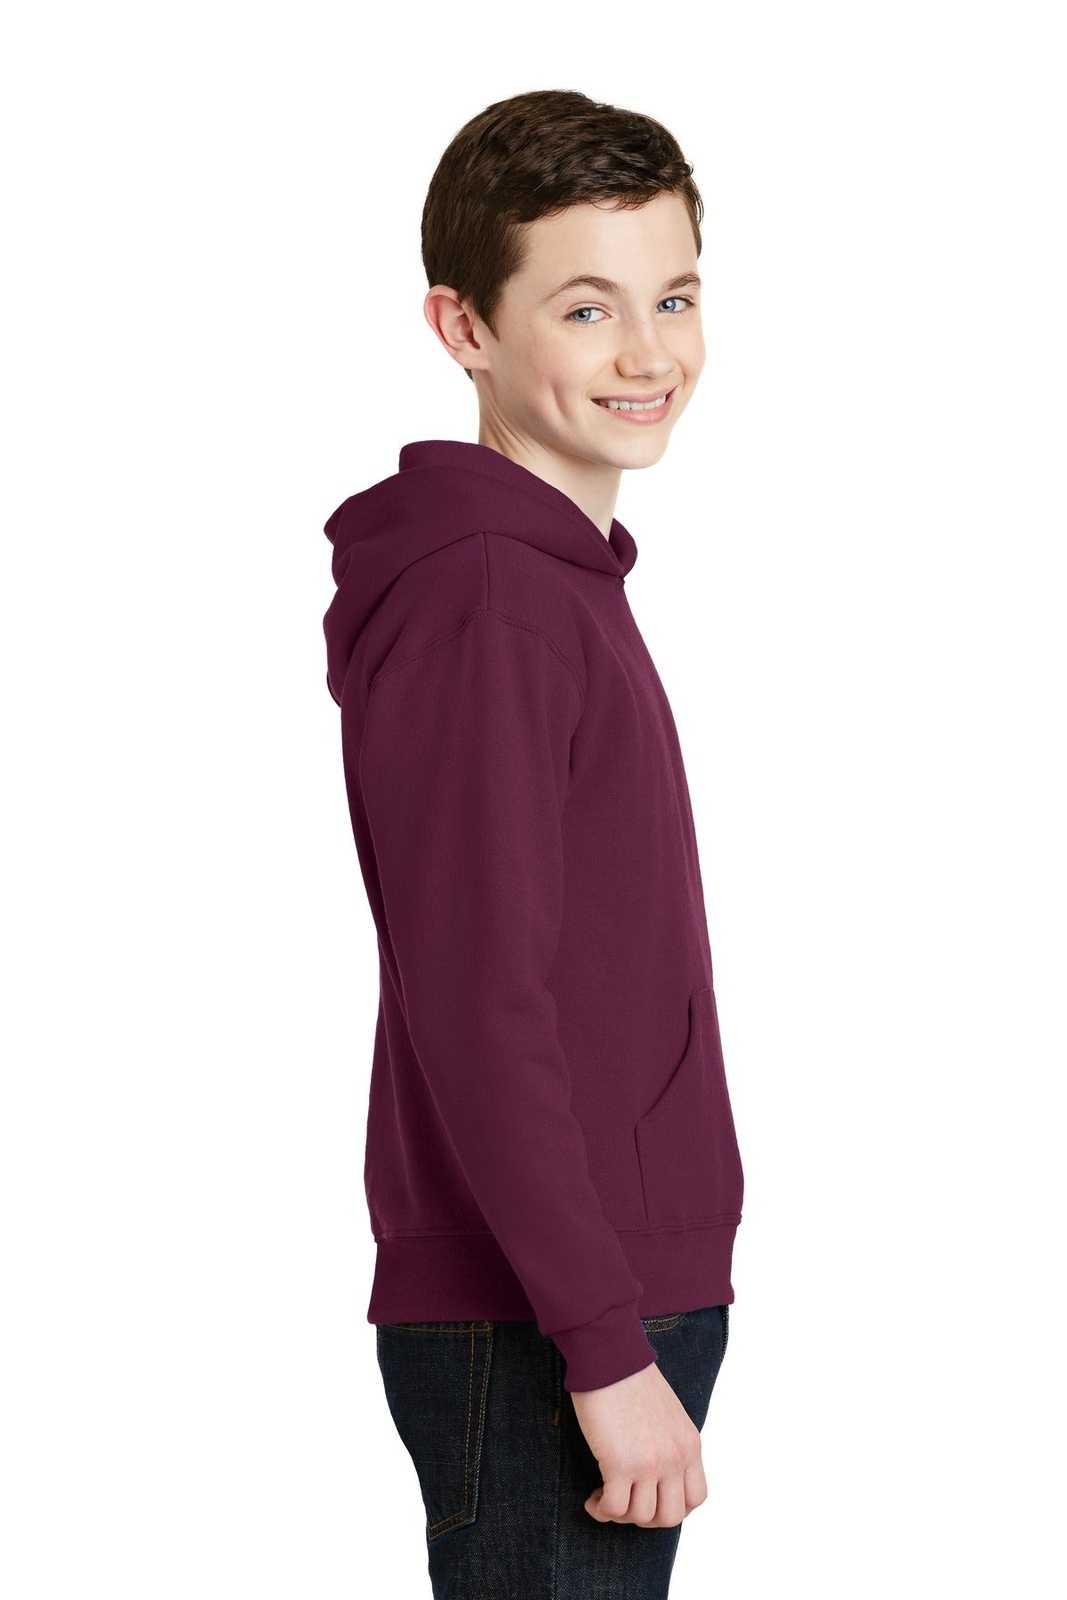 Jerzees 996Y Youth Nublend Pullover Hooded Sweatshirt - Maroon - HIT a Double